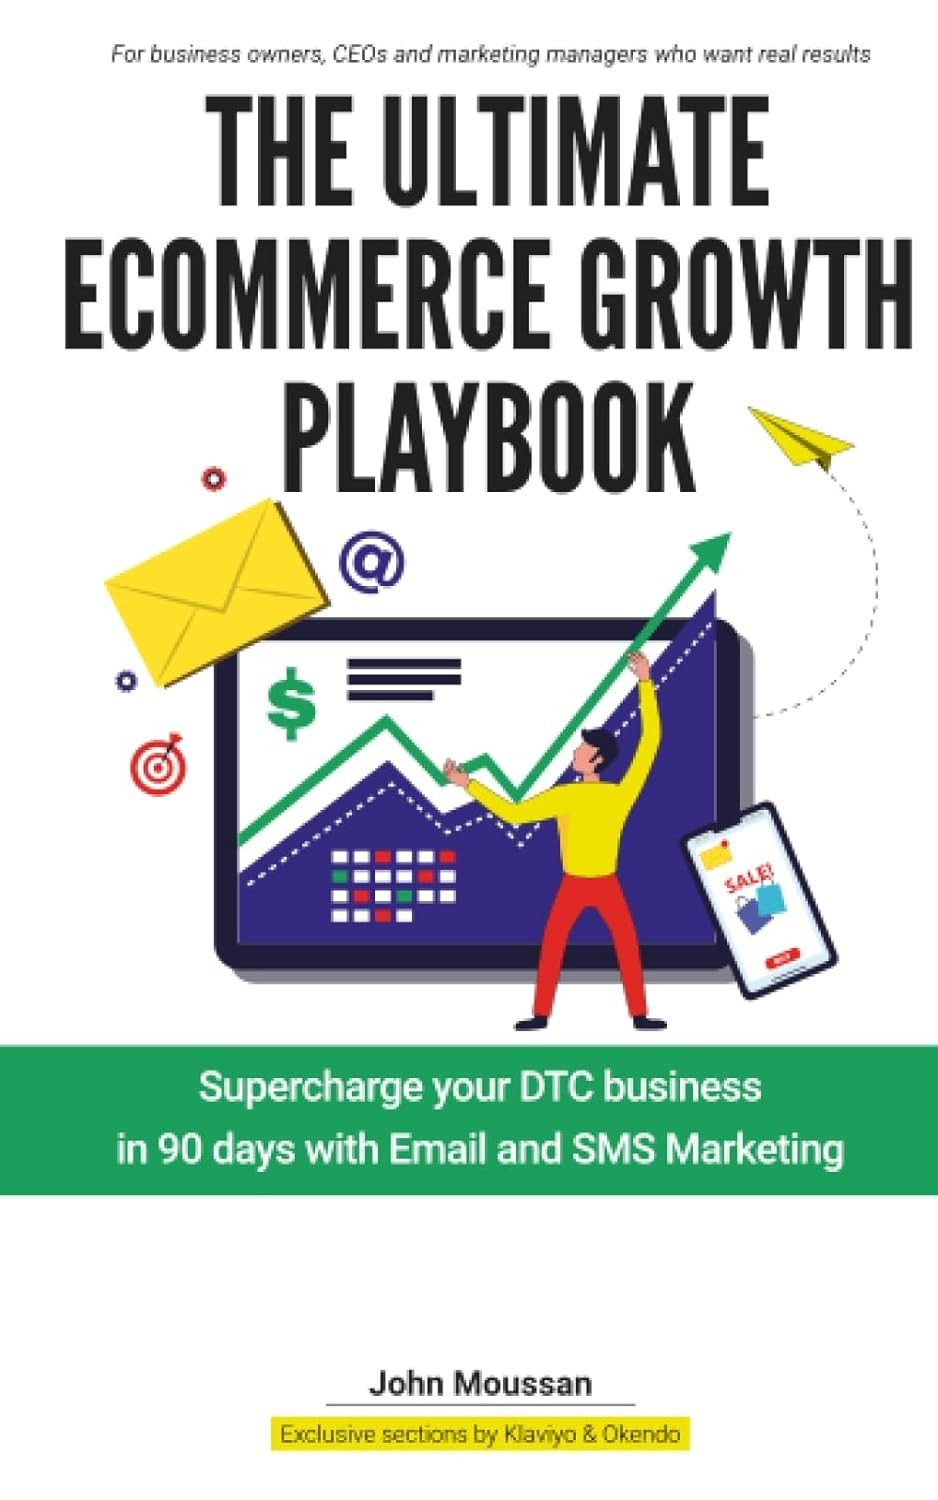 The ultimate eCommerce growth playbook _ Effective email marketing strategy